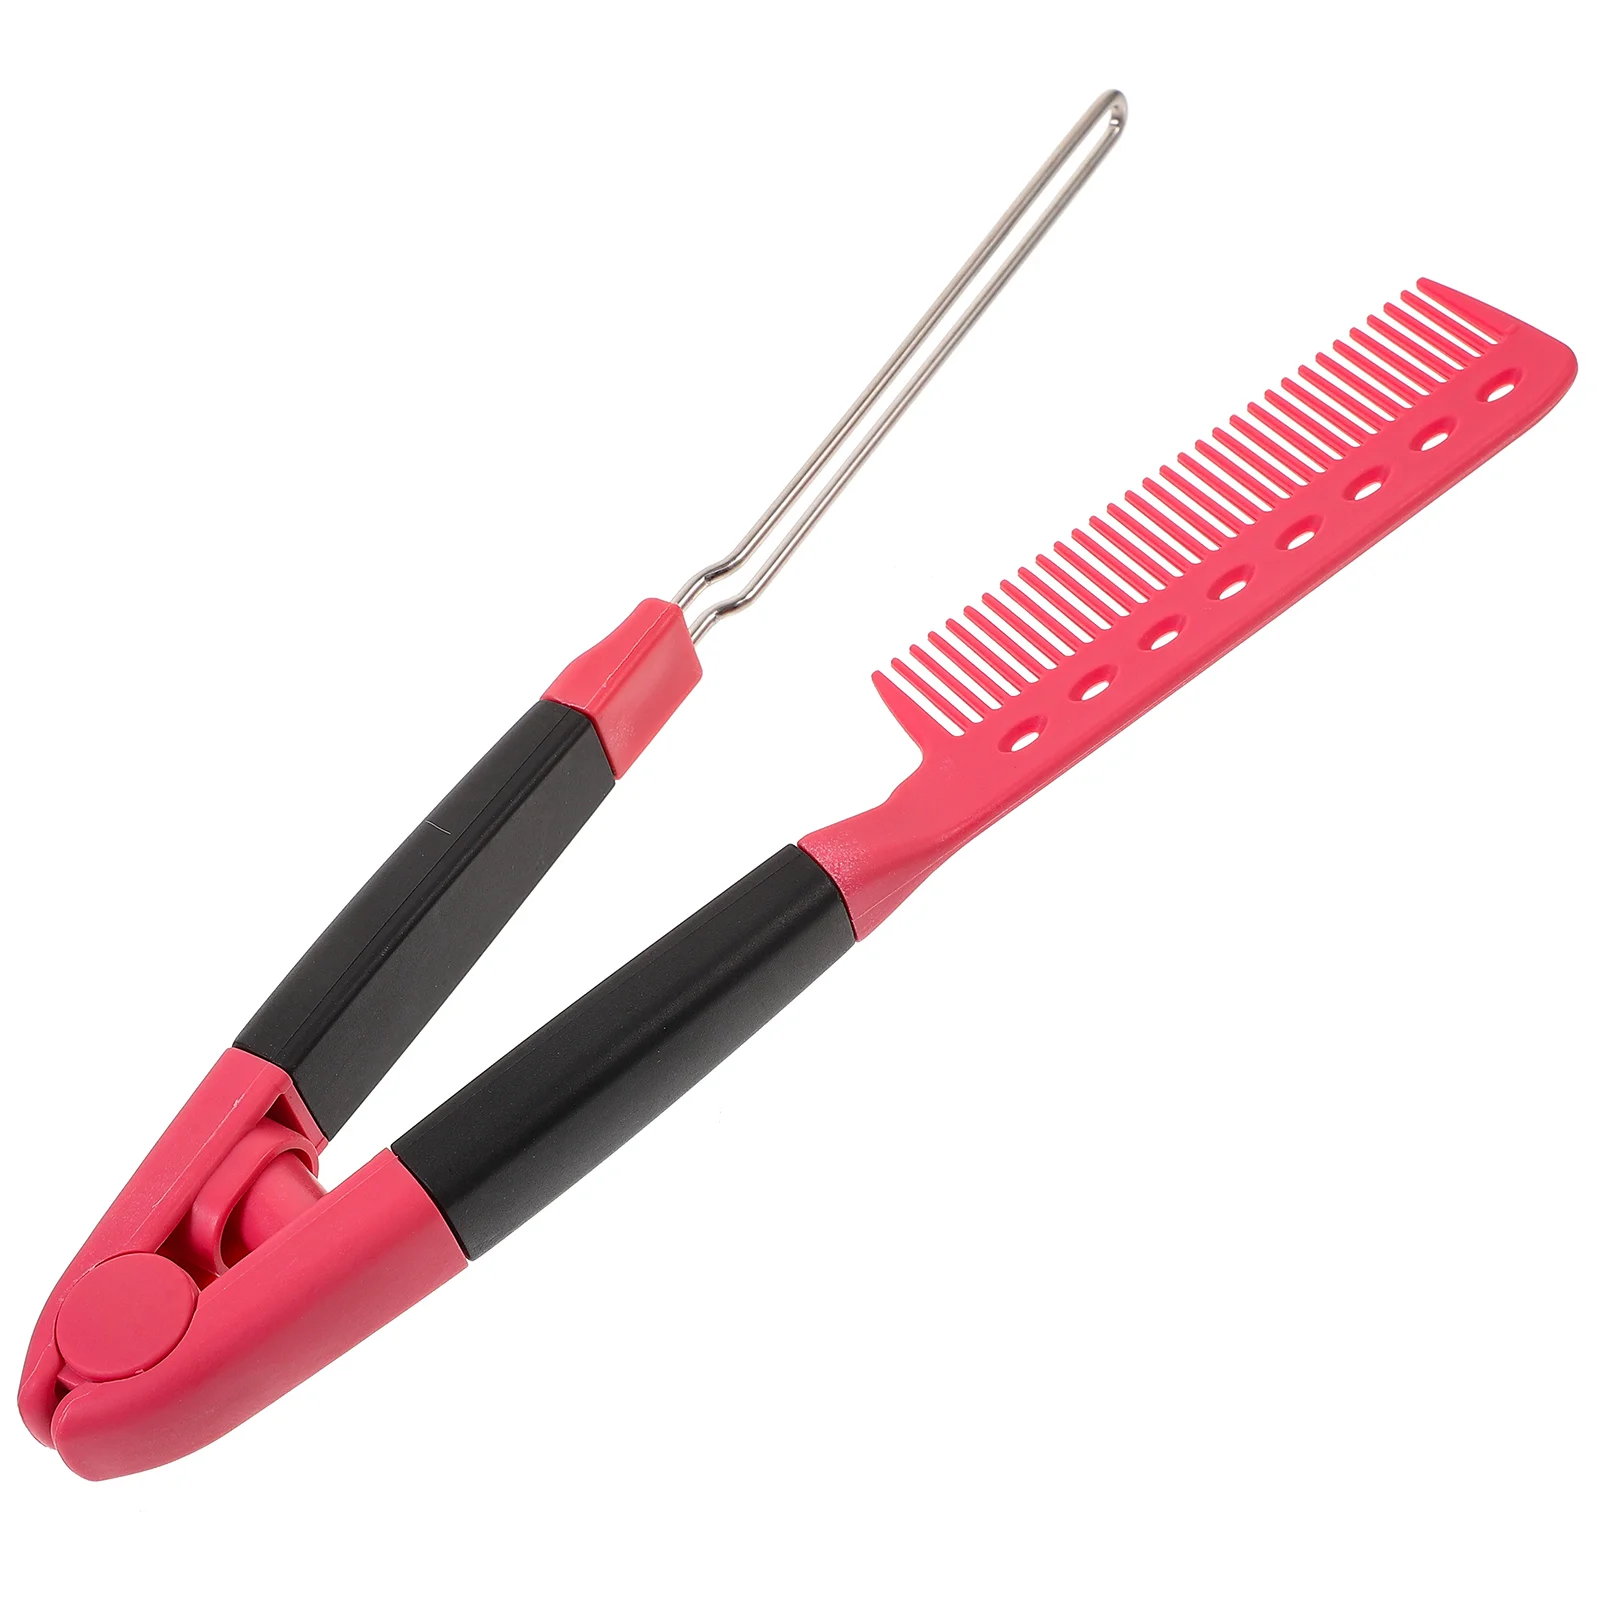 

Styling Comb Hairstyling Haircut Supplies Home Hairbrush Tool Straightener Hairdressing Barrettes